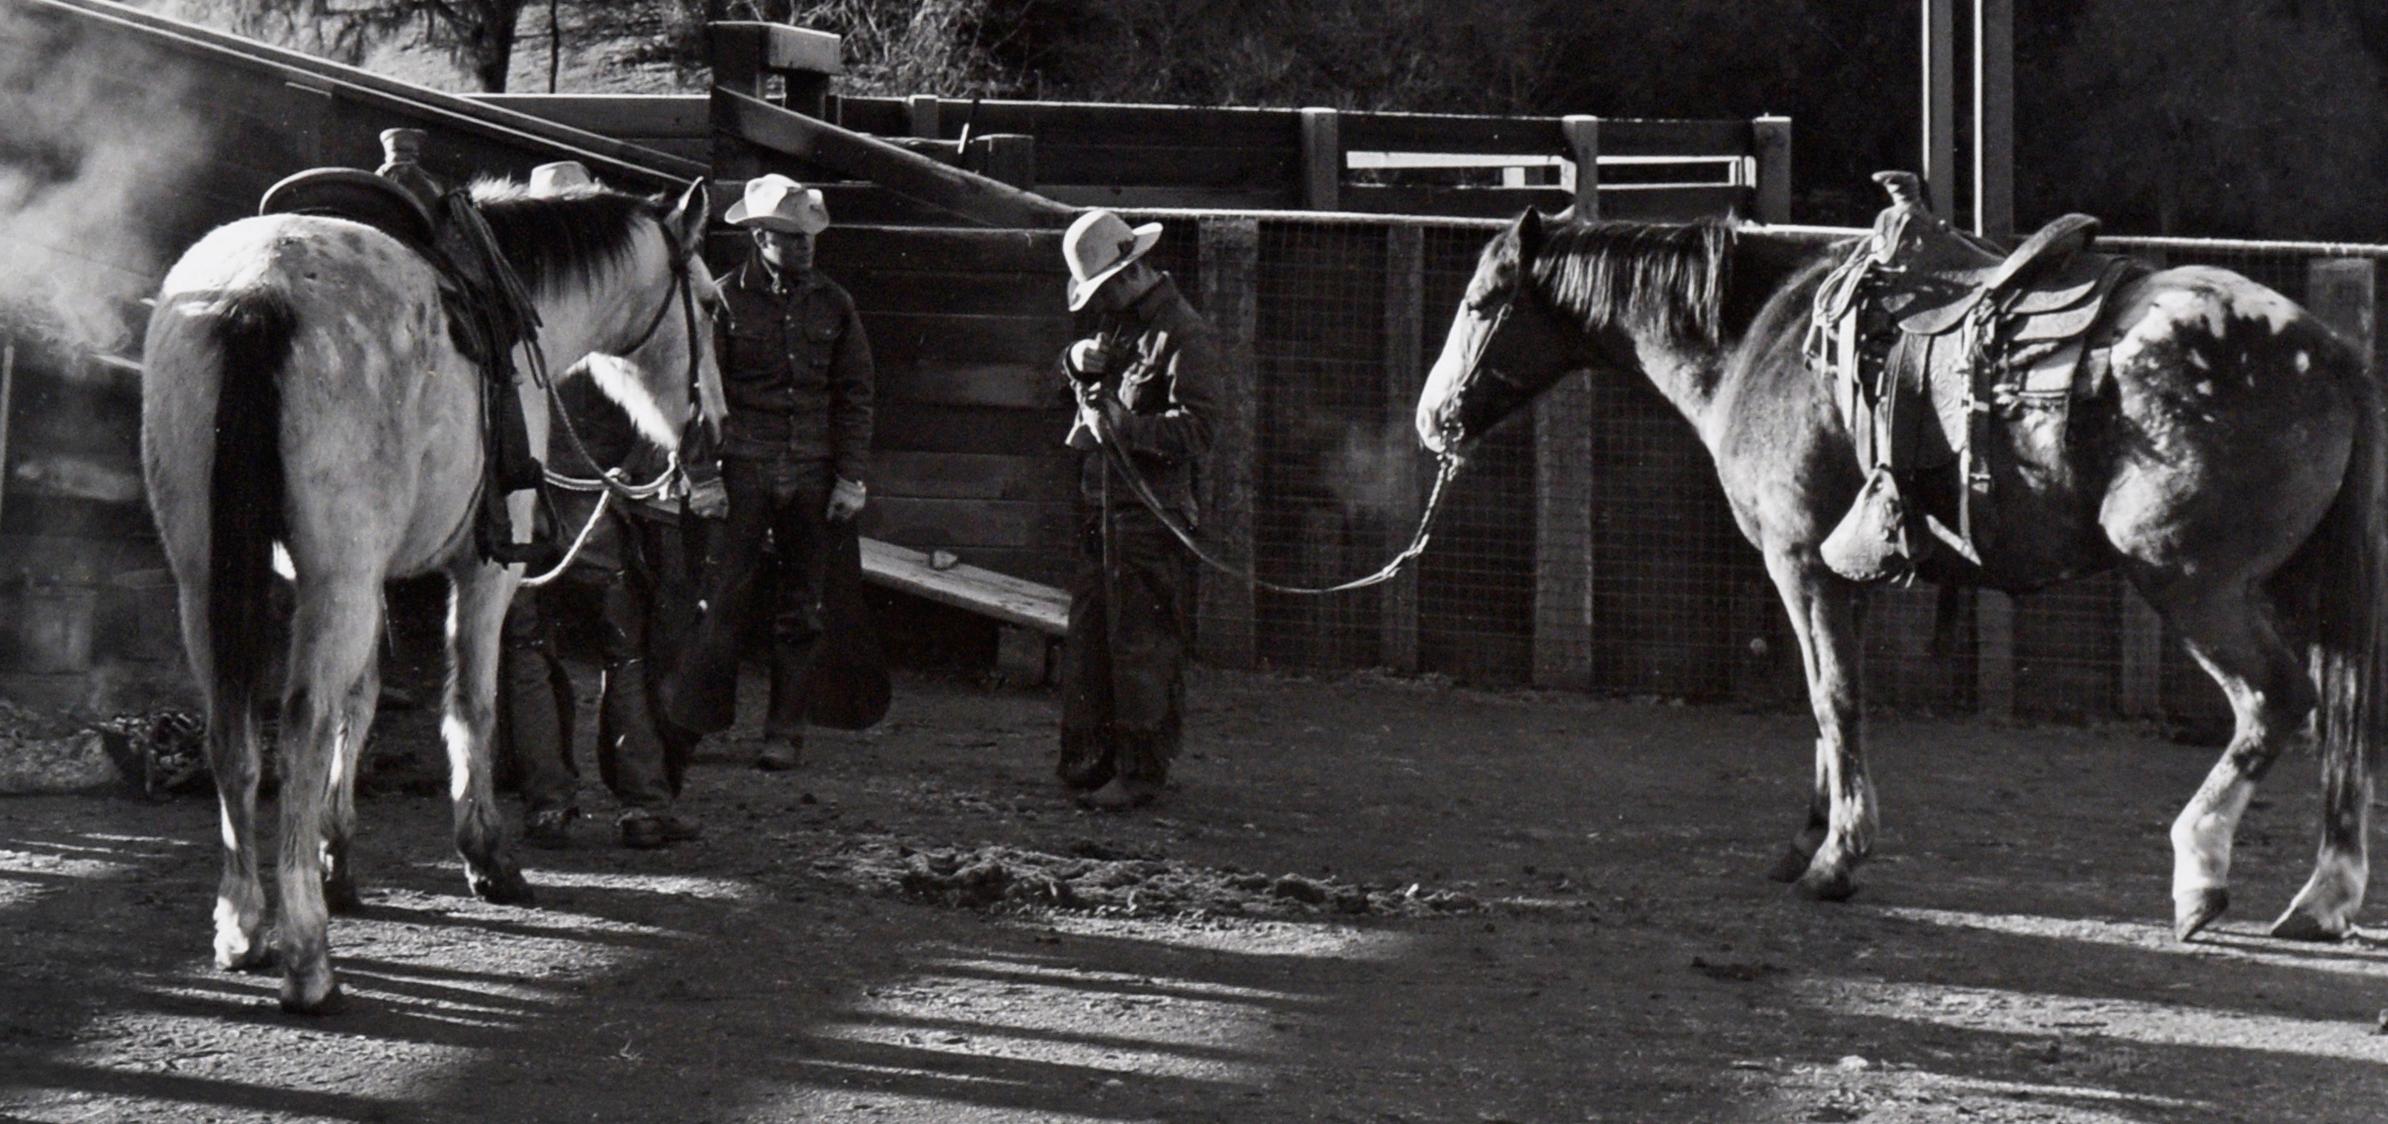 Ranch Hands Oppenheimer - Rancho San Carlos Cattle Ranch, 1950's Photograph For Sale 2